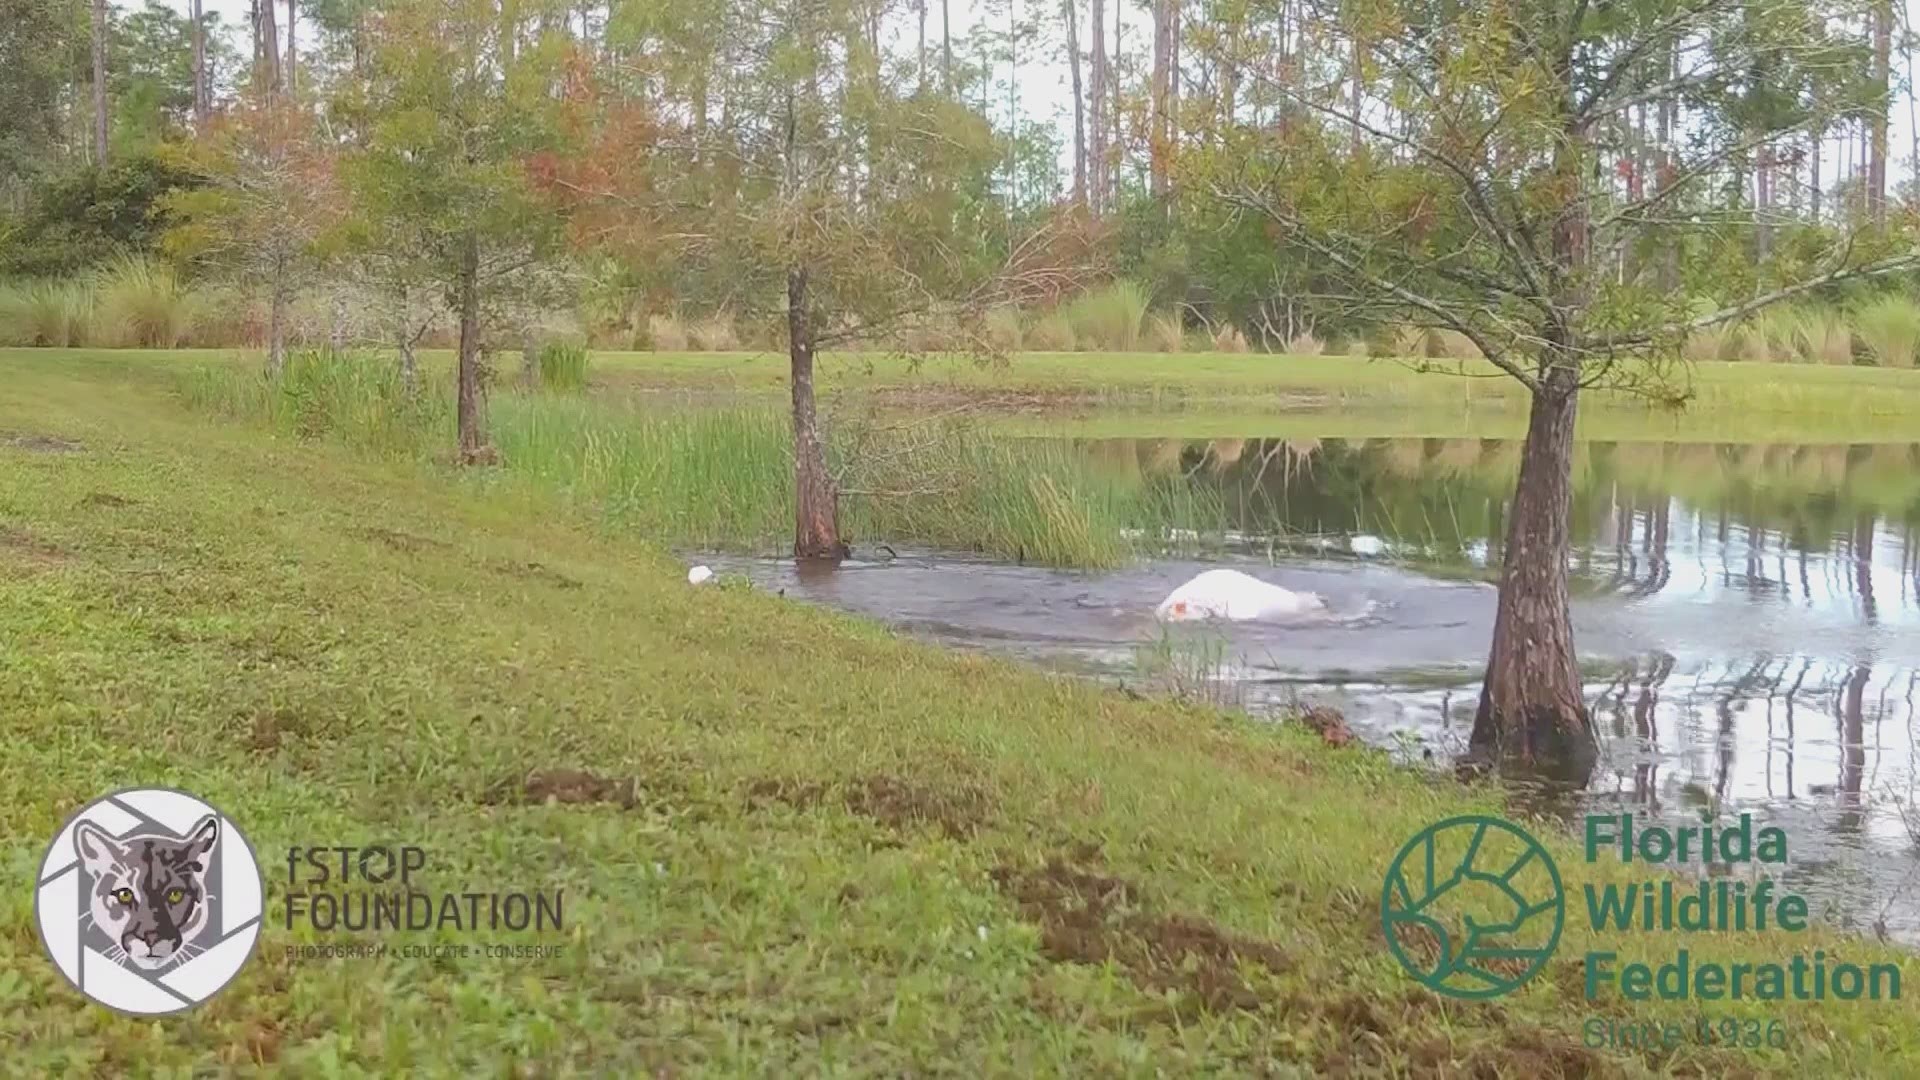 Video shows a Florida man jump into a pond to rescue his puppy from an alligator.